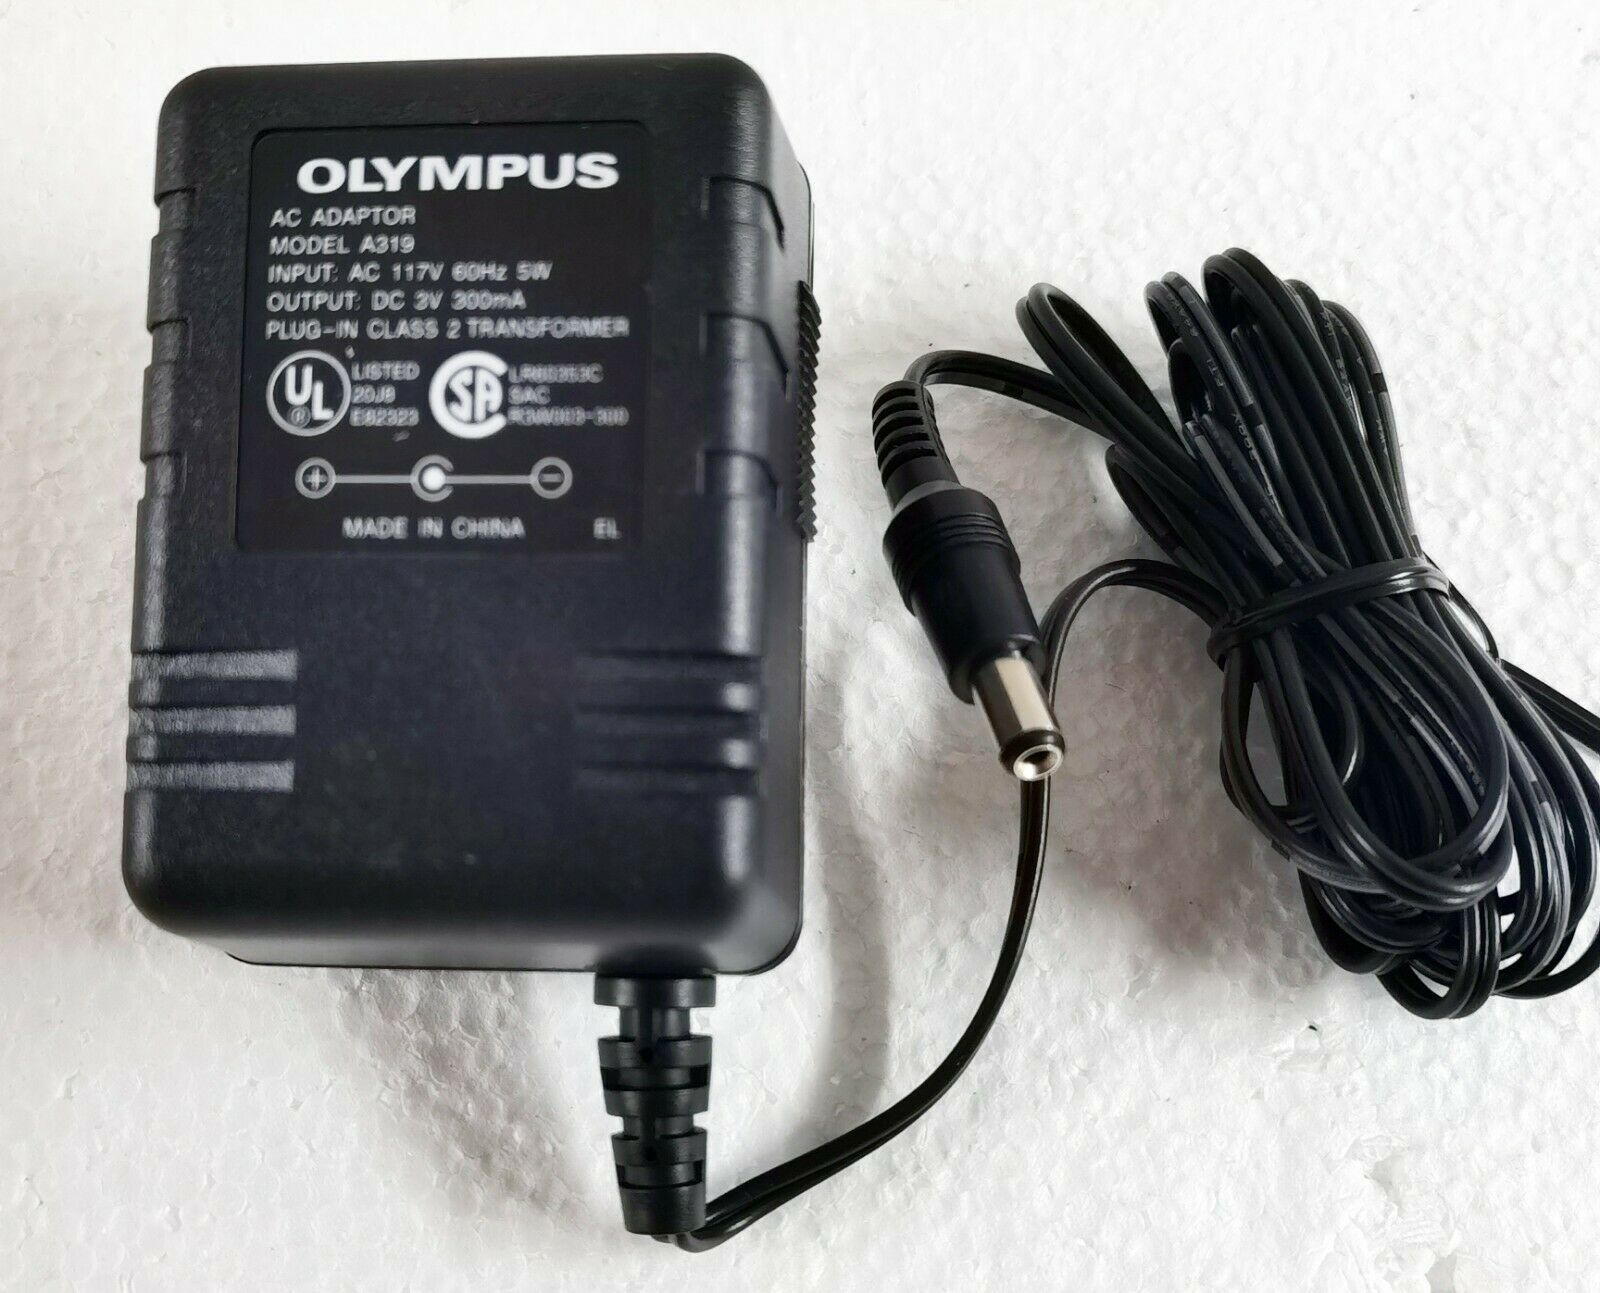 Genuine Olympus Pearlcorder AC Adapter 3V 300mA P/N A319 Type: AC/AC Adapter Output Voltage: 3